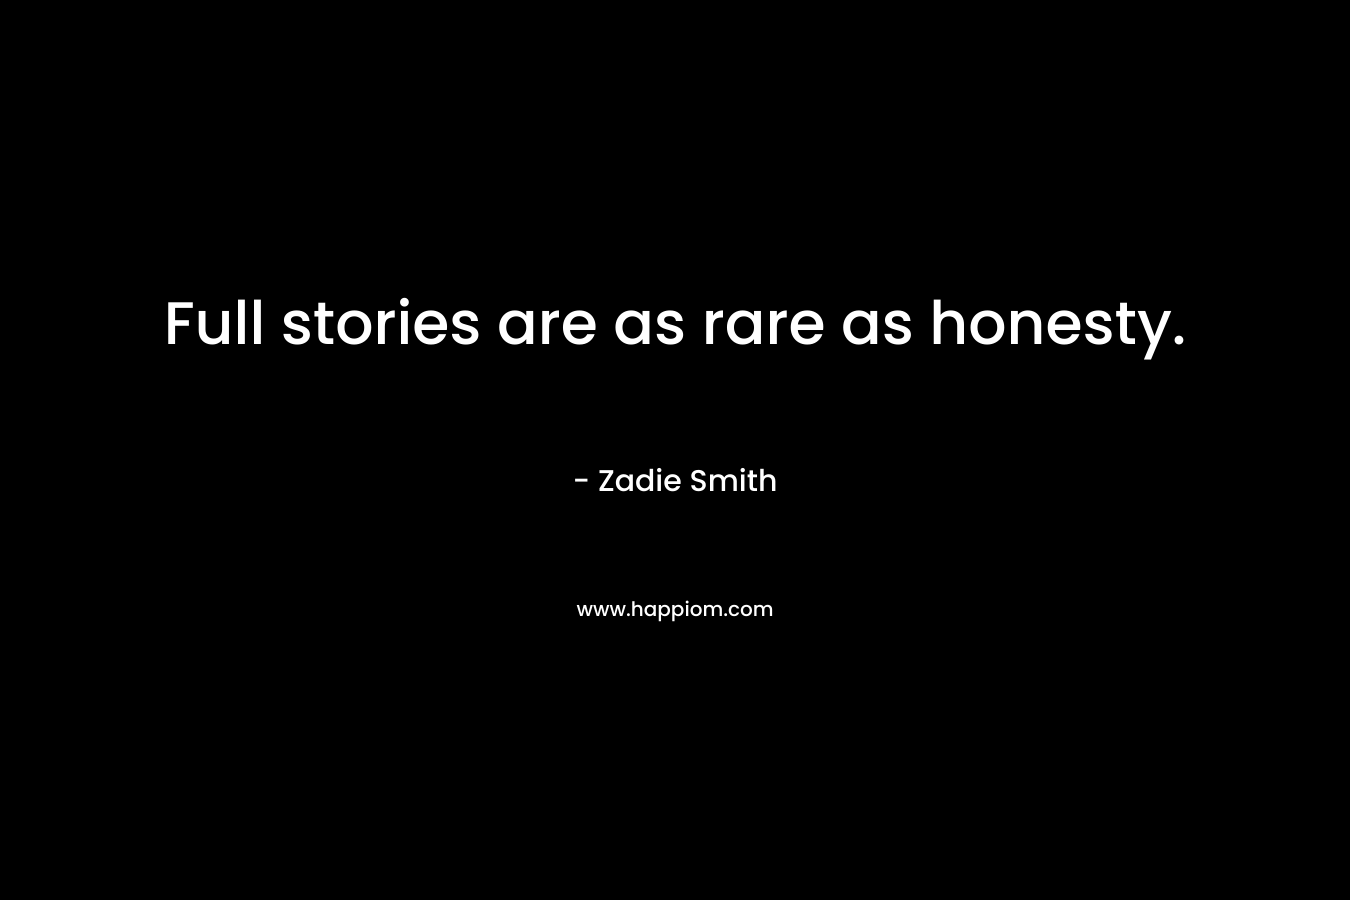 Full stories are as rare as honesty. – Zadie Smith